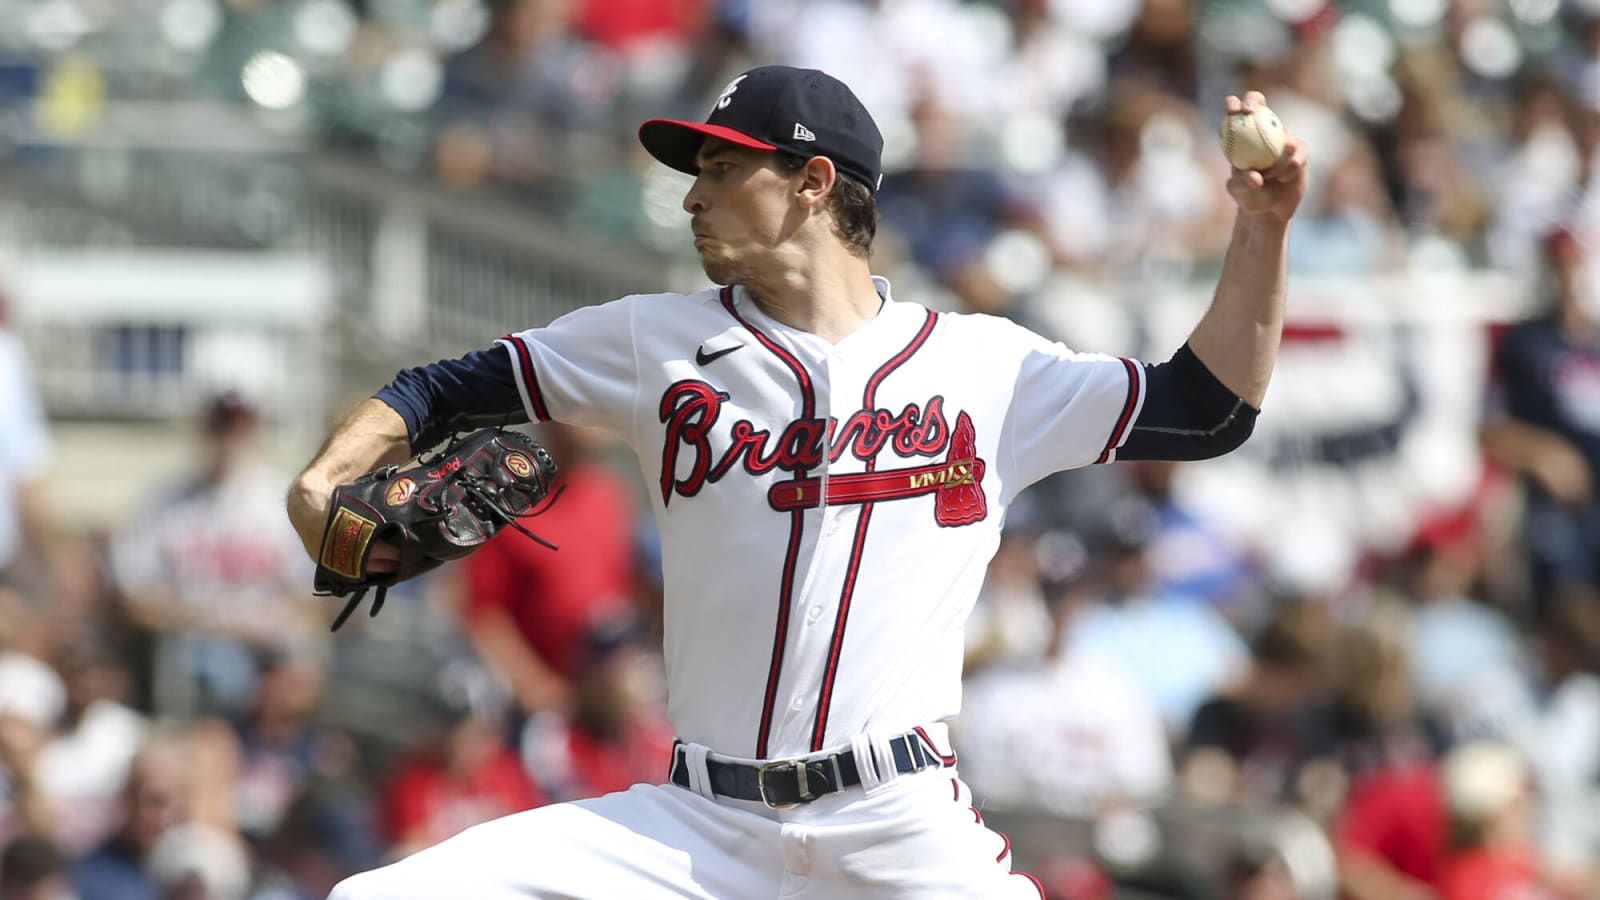 Braves mailbag: Trade options, player extensions, and more